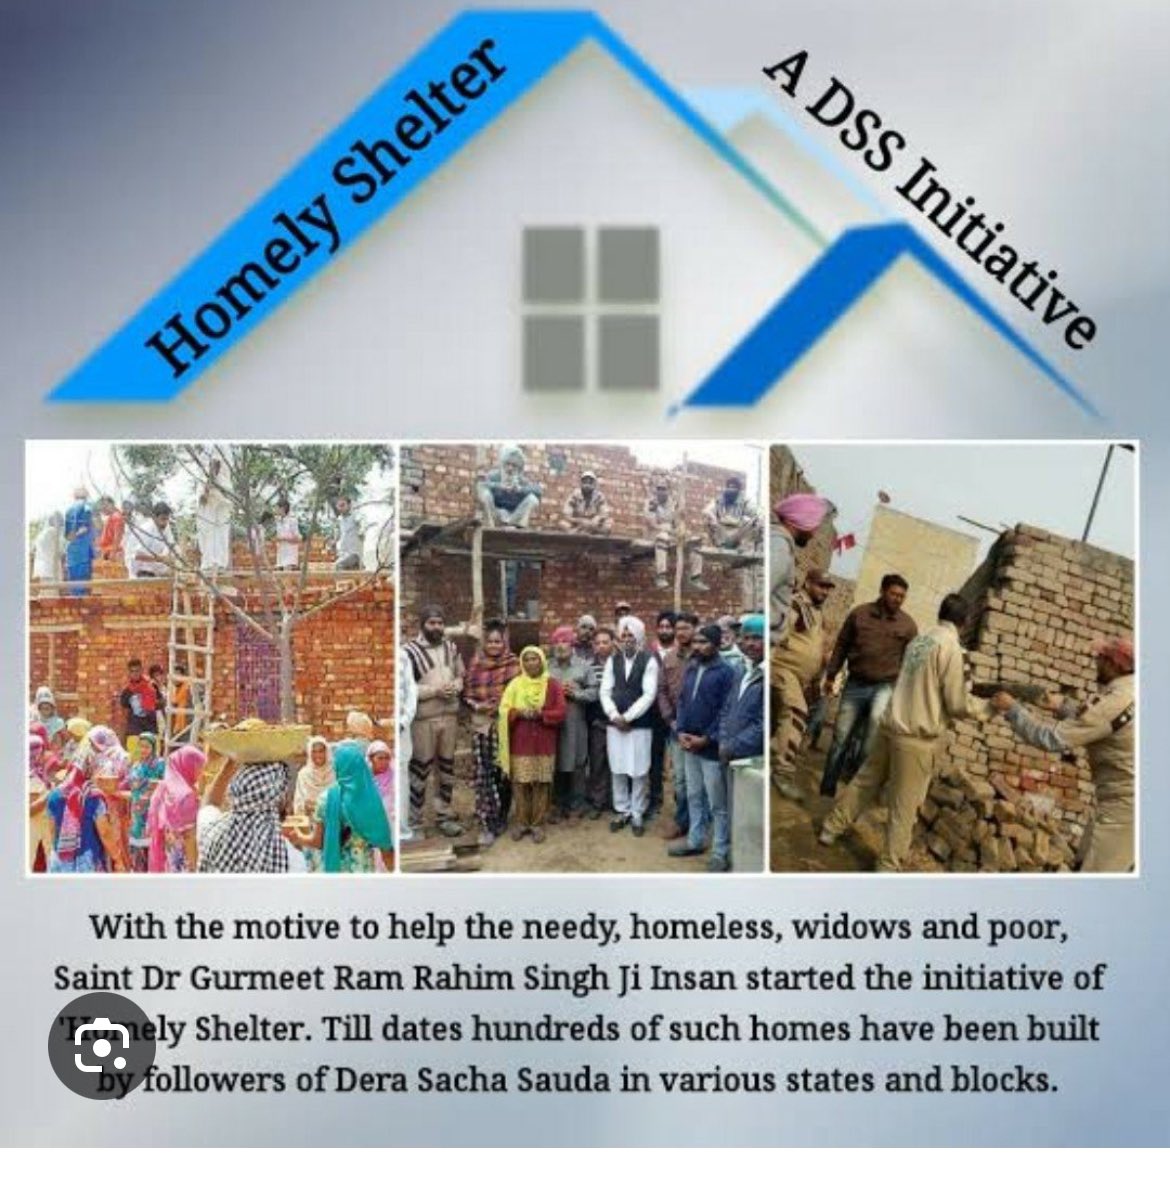 The organization building homes free of cost & giving a roof on their heads, which are bound to live in open even in this bitter cold. Many have died every winter due to excess cold while they are sleeping without a roof on their heads. Dera Sacha Sauda are doing, 
#Homelyshelter